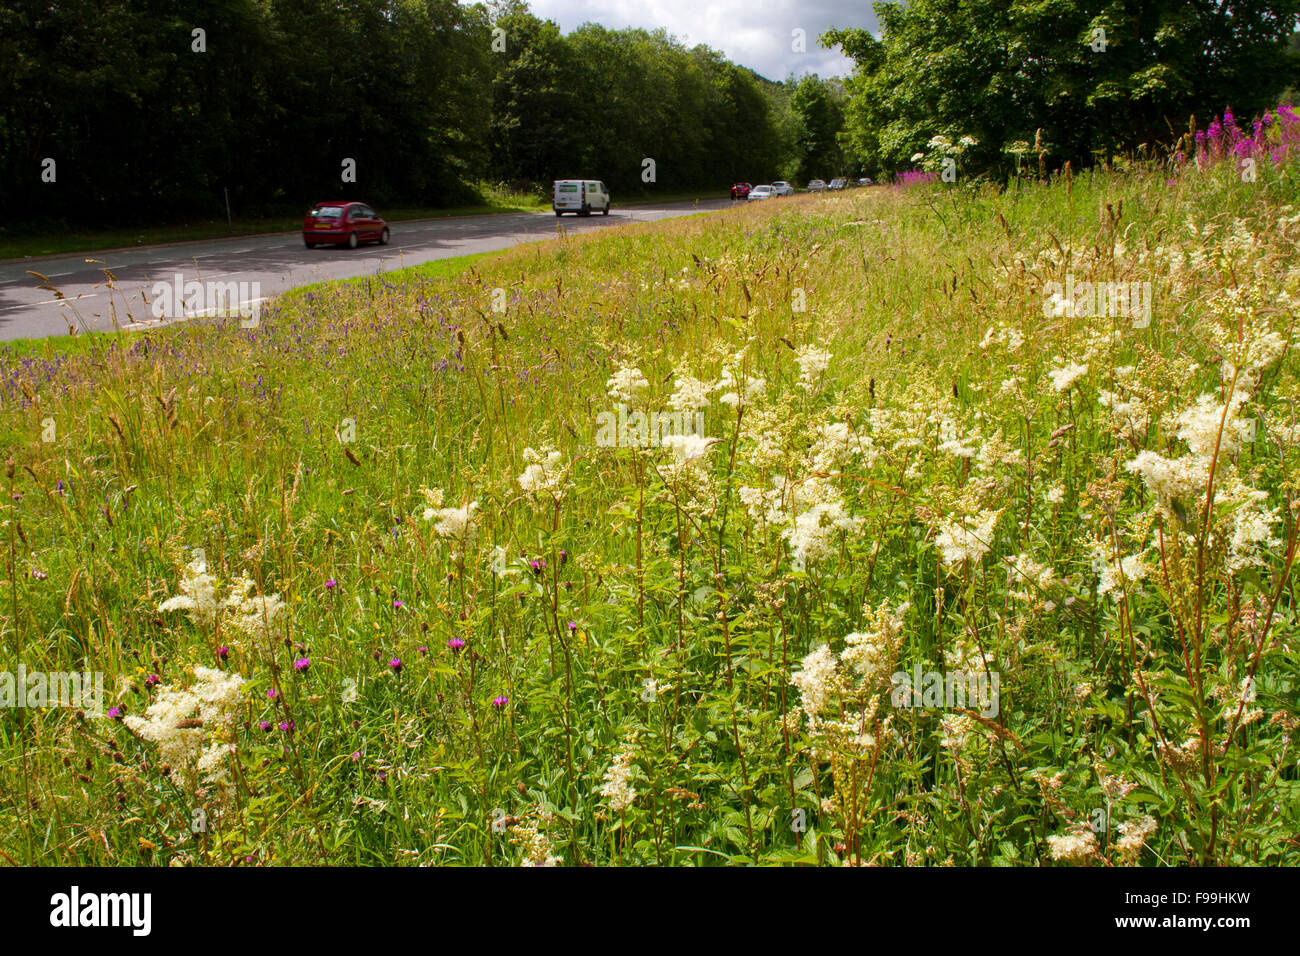 Meadowsweet (Filipendula ulmaria) and other wildflowers on a road verge. A470 near Llanidloes, Powys, Wales, July. Stock Photo